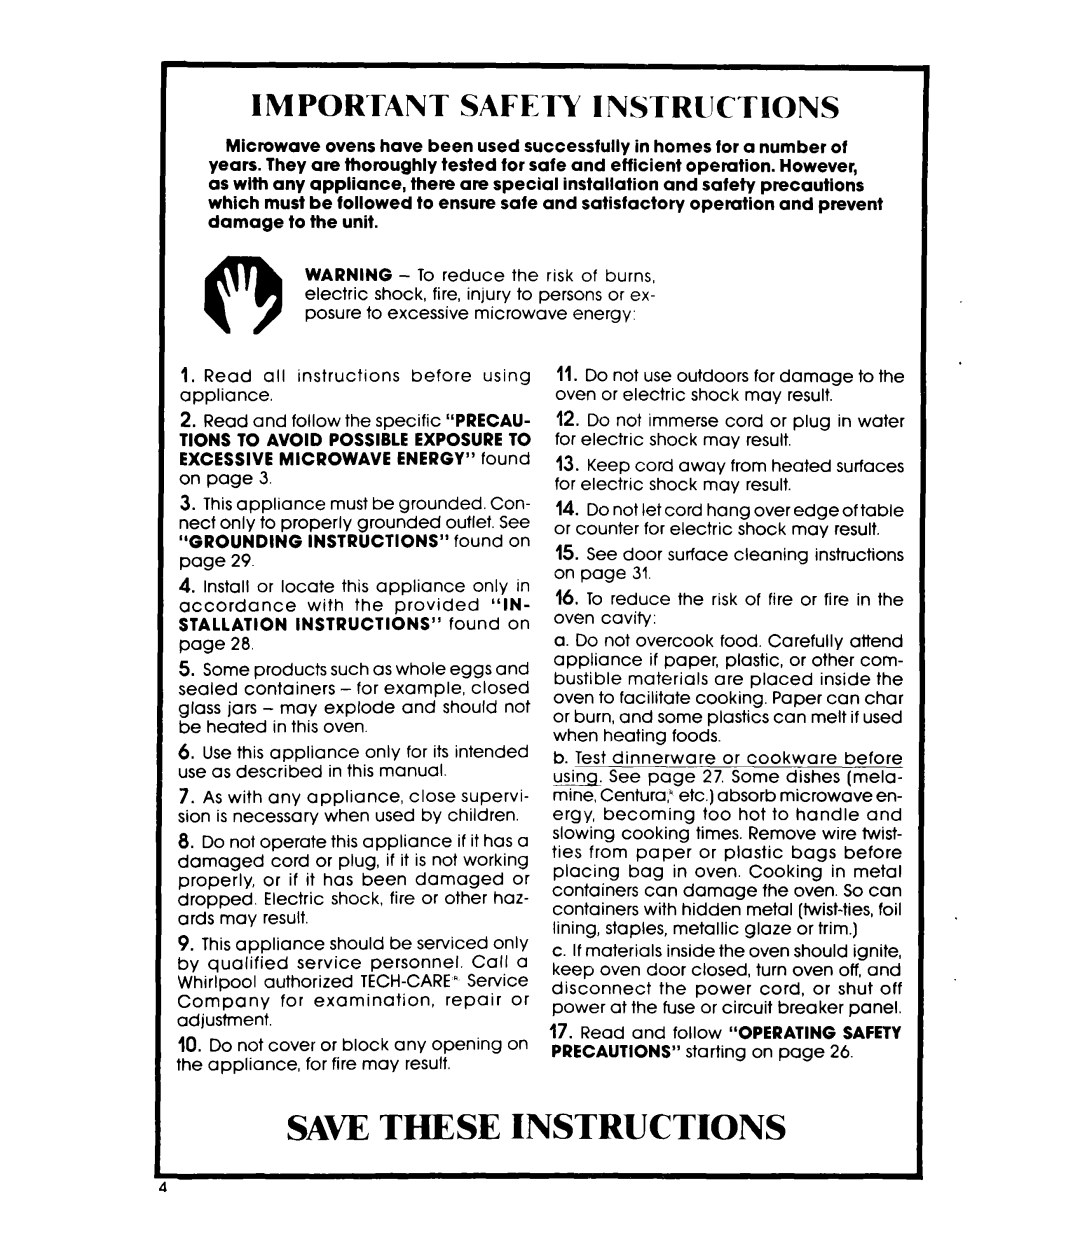 Whirlpool MW88OOXR manual Saw These Instructions, Important Safety Instructions 